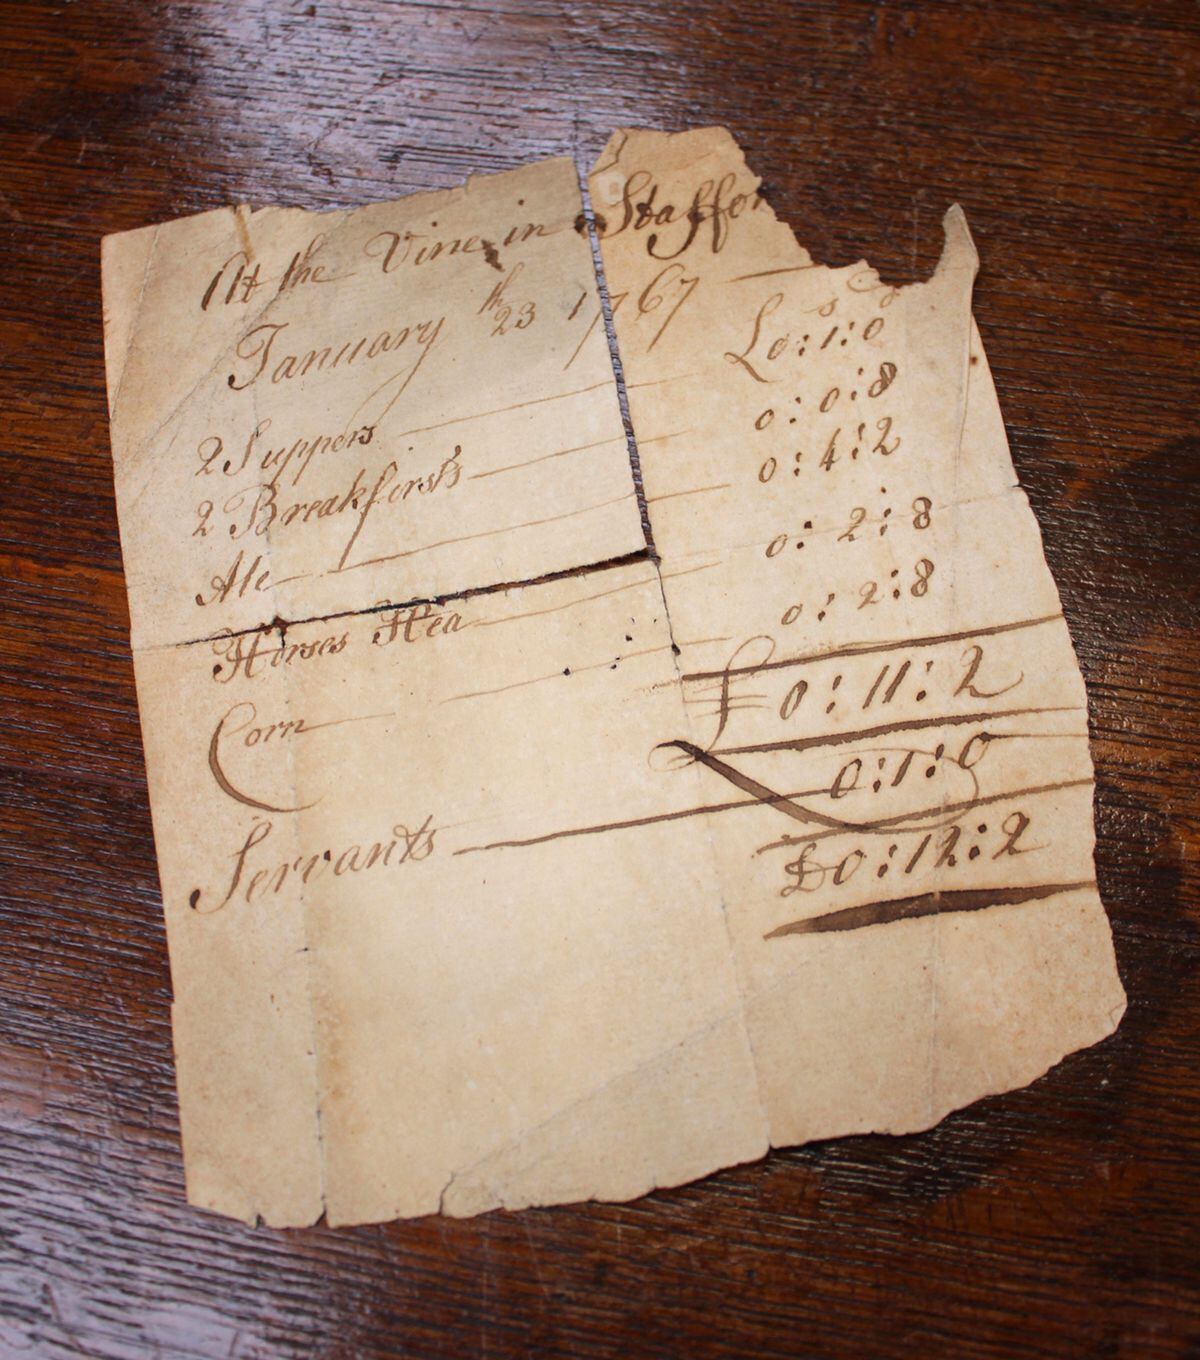 This bed and breakfast receipt for an overnight stay at The Vine Hotel in Stafford, dating back 250 years was discovered in a chest of drawers. The handwritten paper receipt is dated January 23, 1767 and comes to a grand total of twelve shillings and tuppence.  